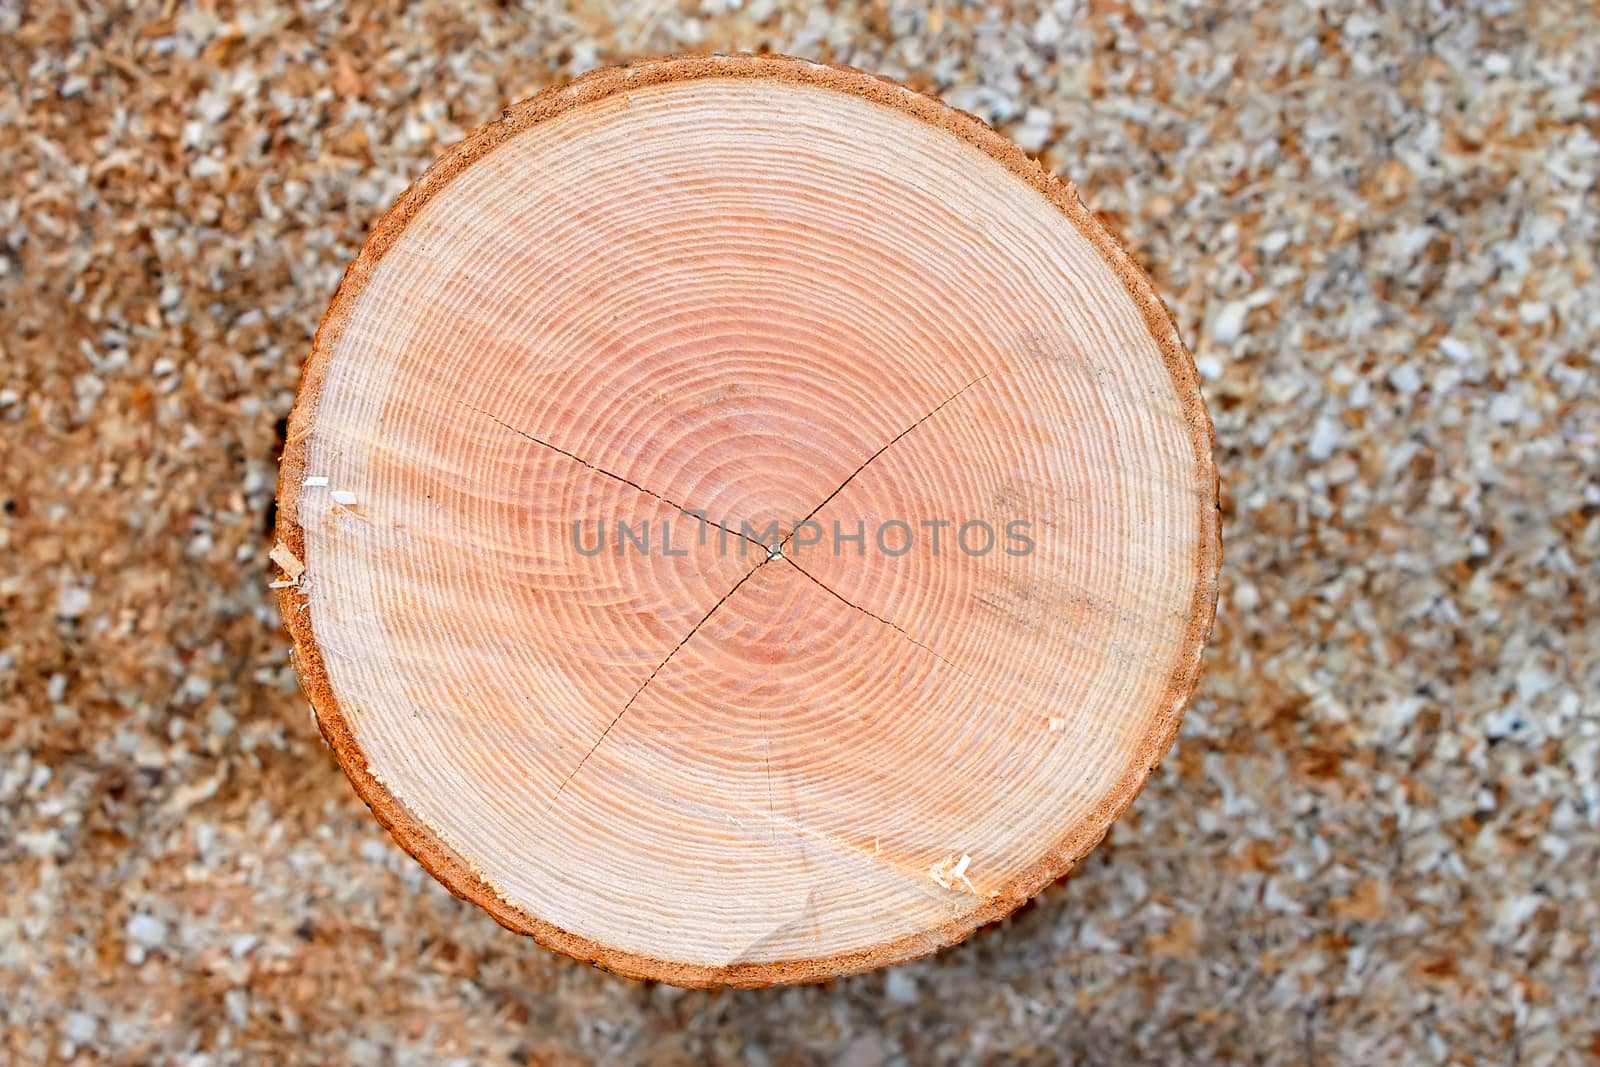 Firewood cutting log close up over sawdust background 